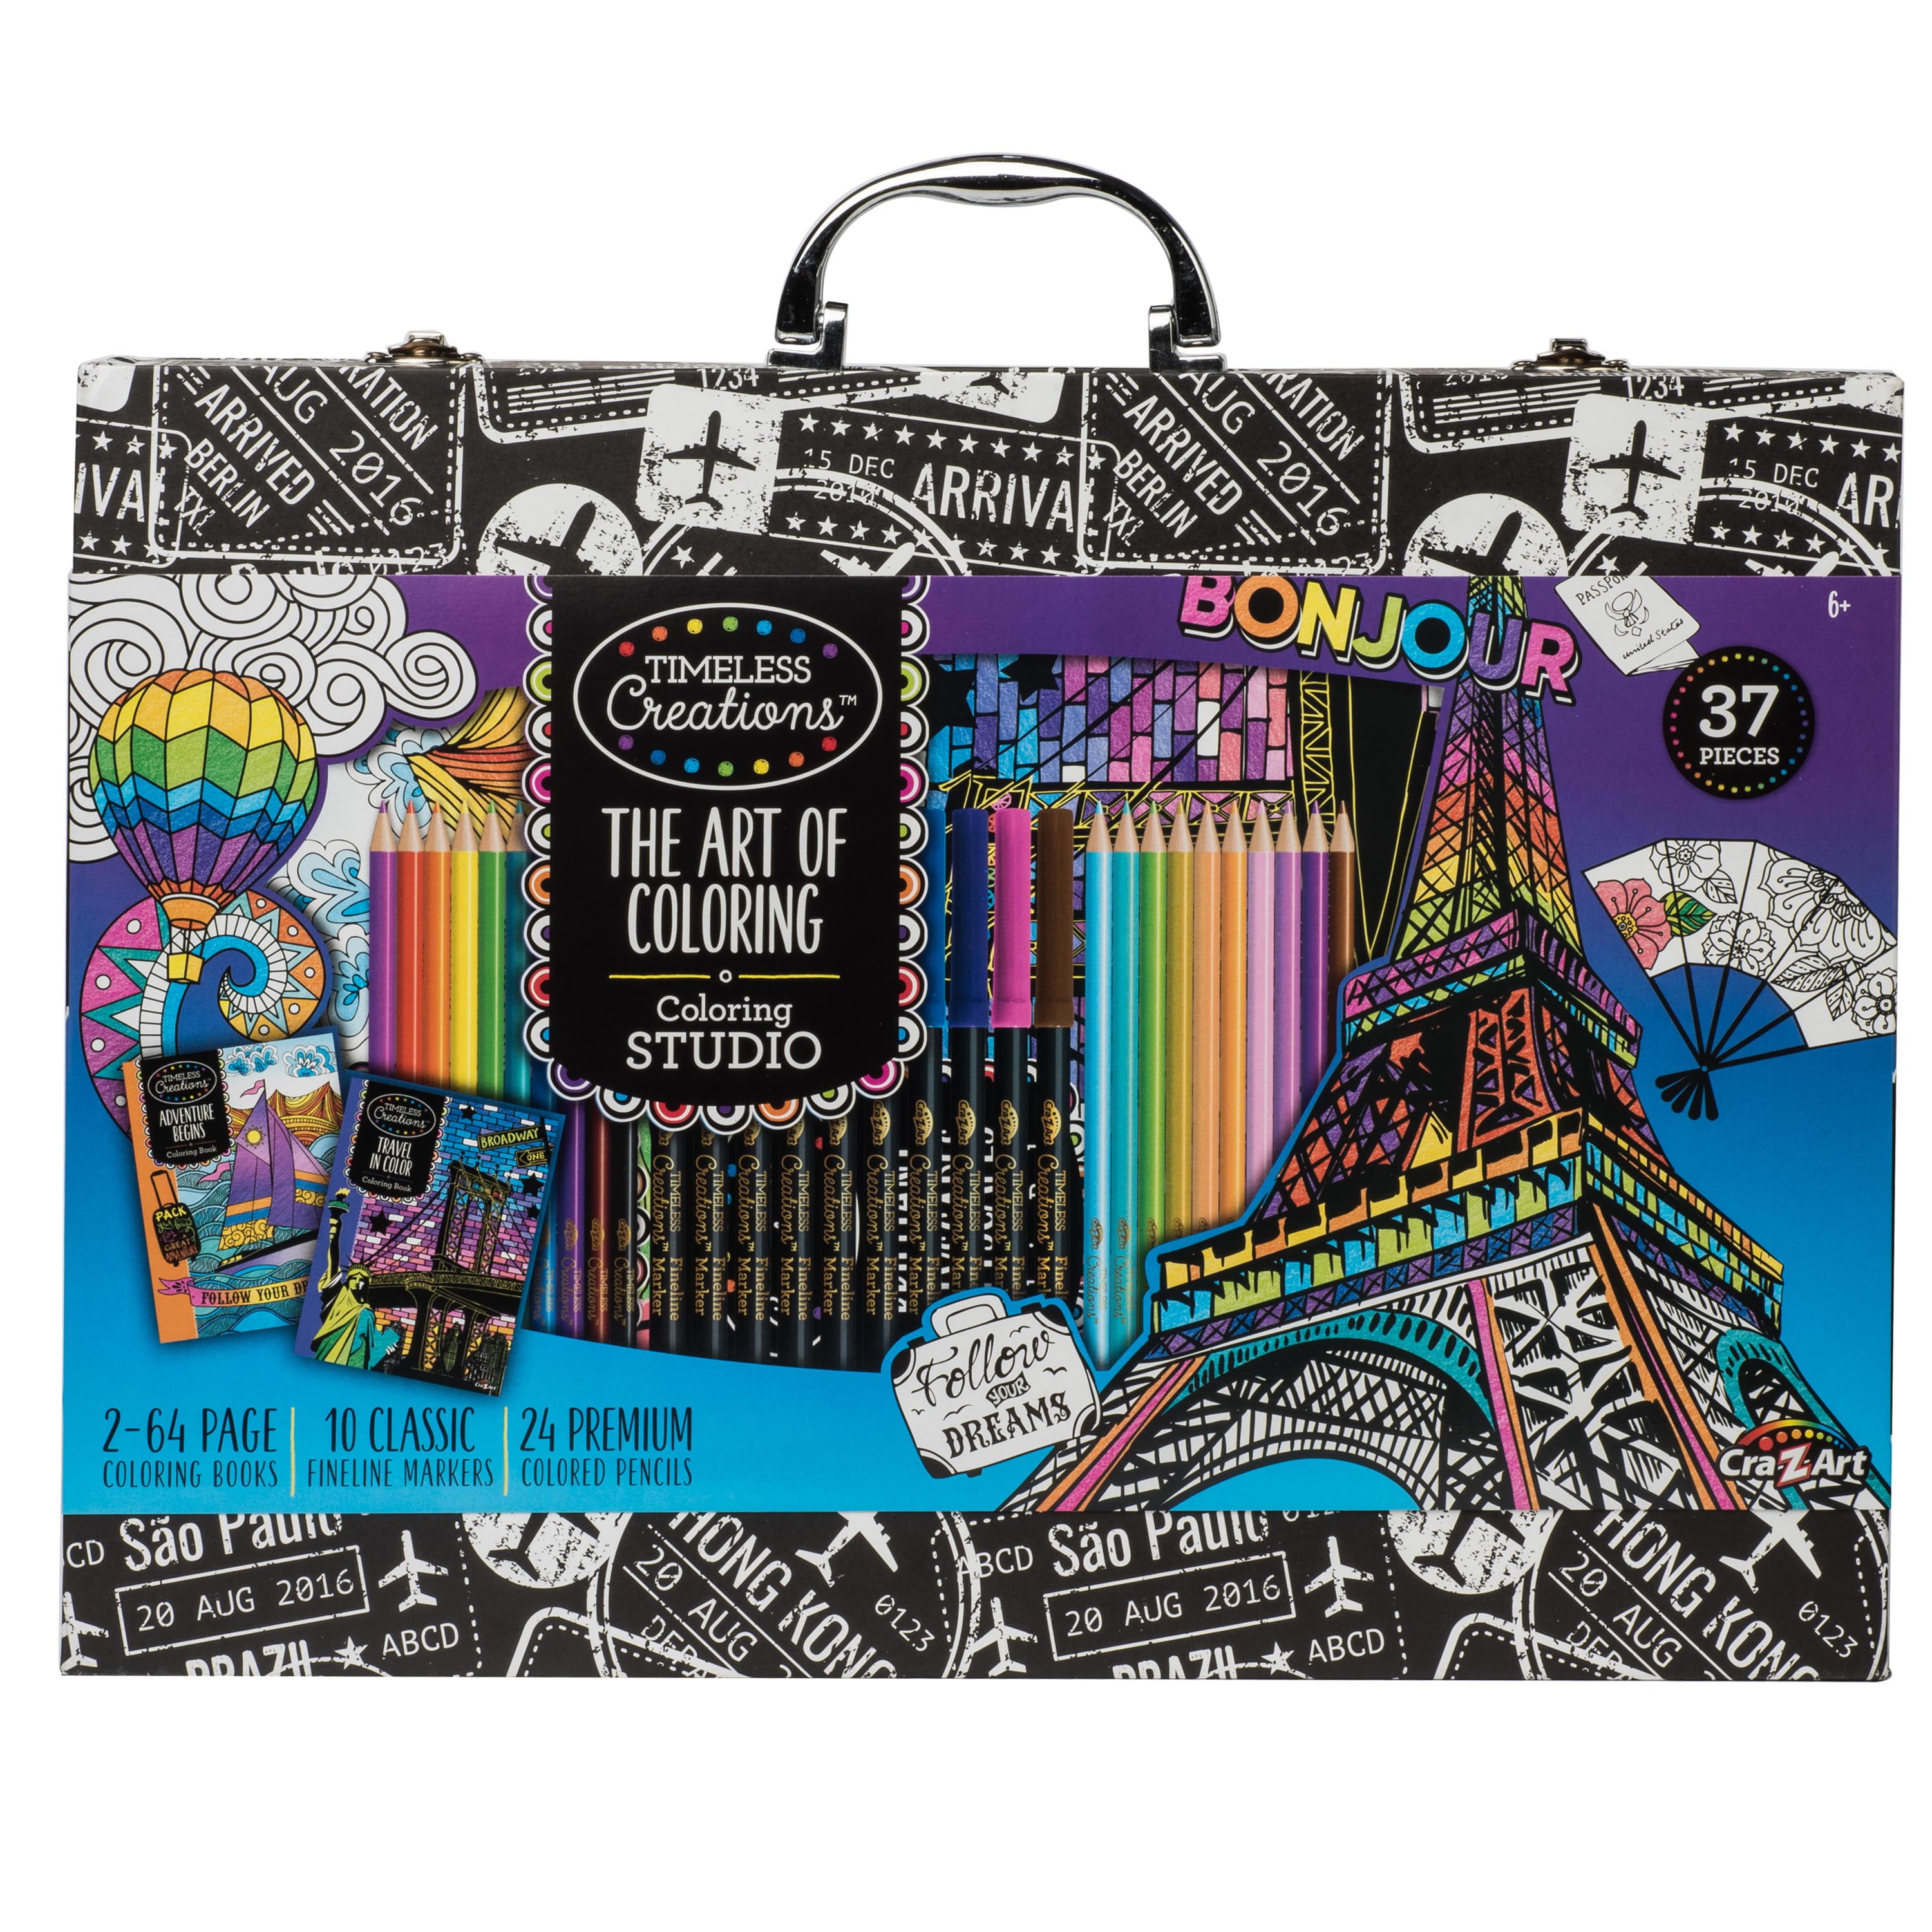 Cra-Z-Art Timeless Creations Adult Coloring Art Set, Holiday Gift